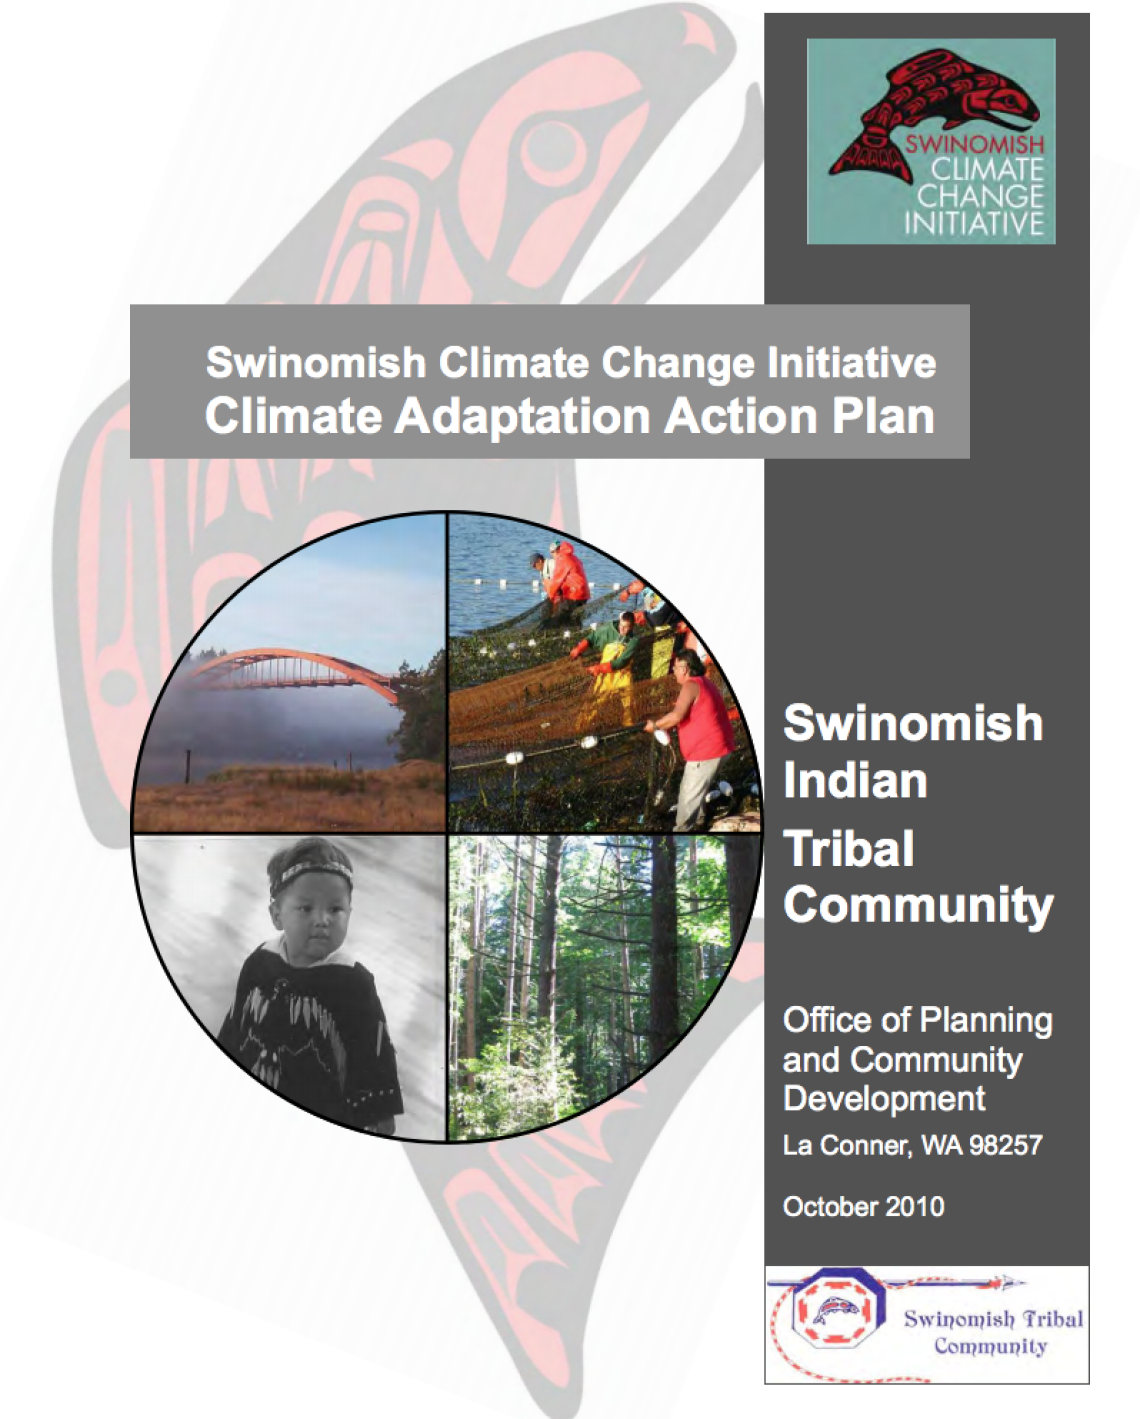 Swinomish Climate Change Initiative: Climate Adaptation Action Plan